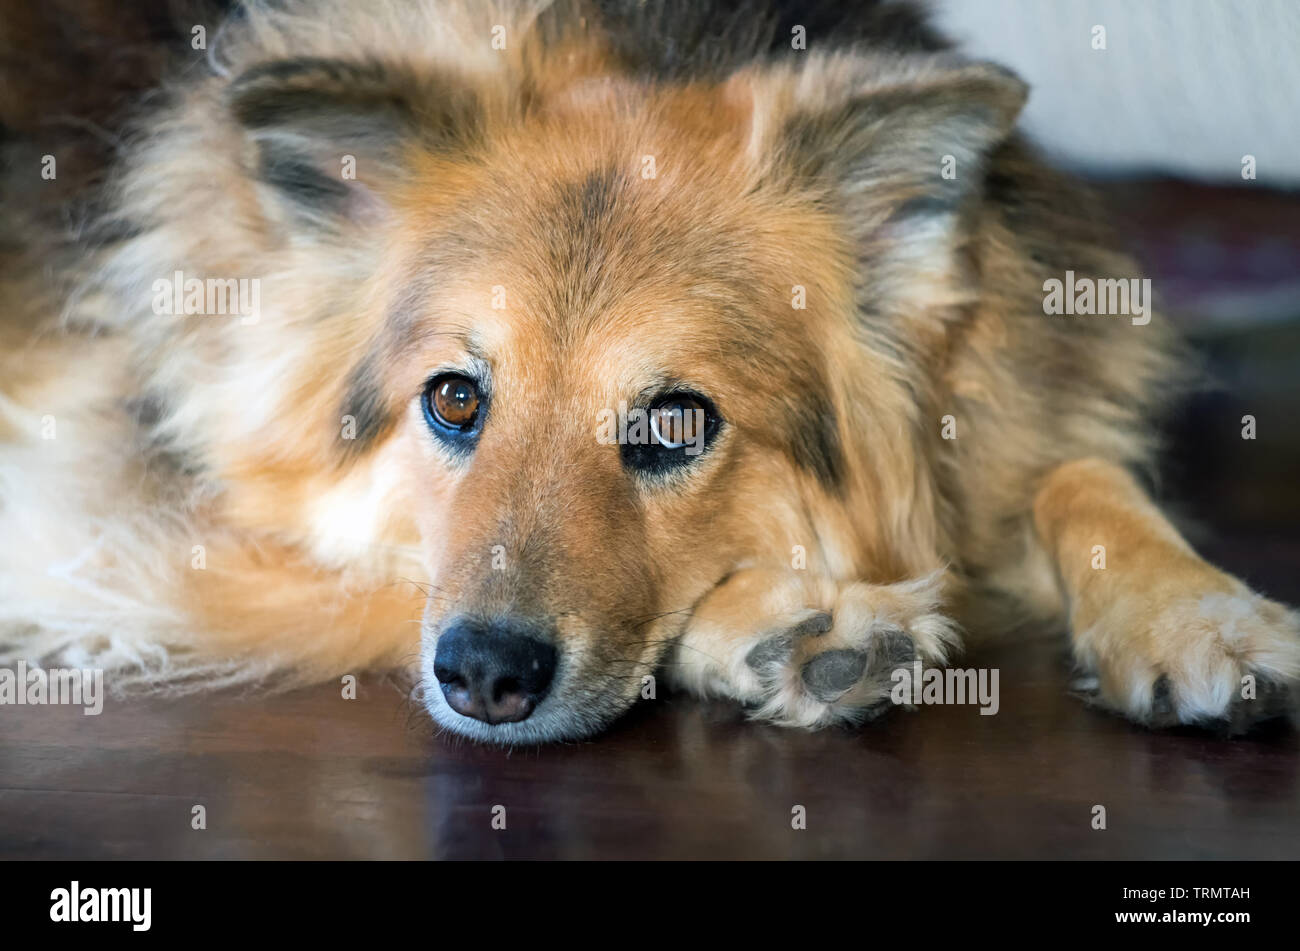 stock photography and images - Alamy